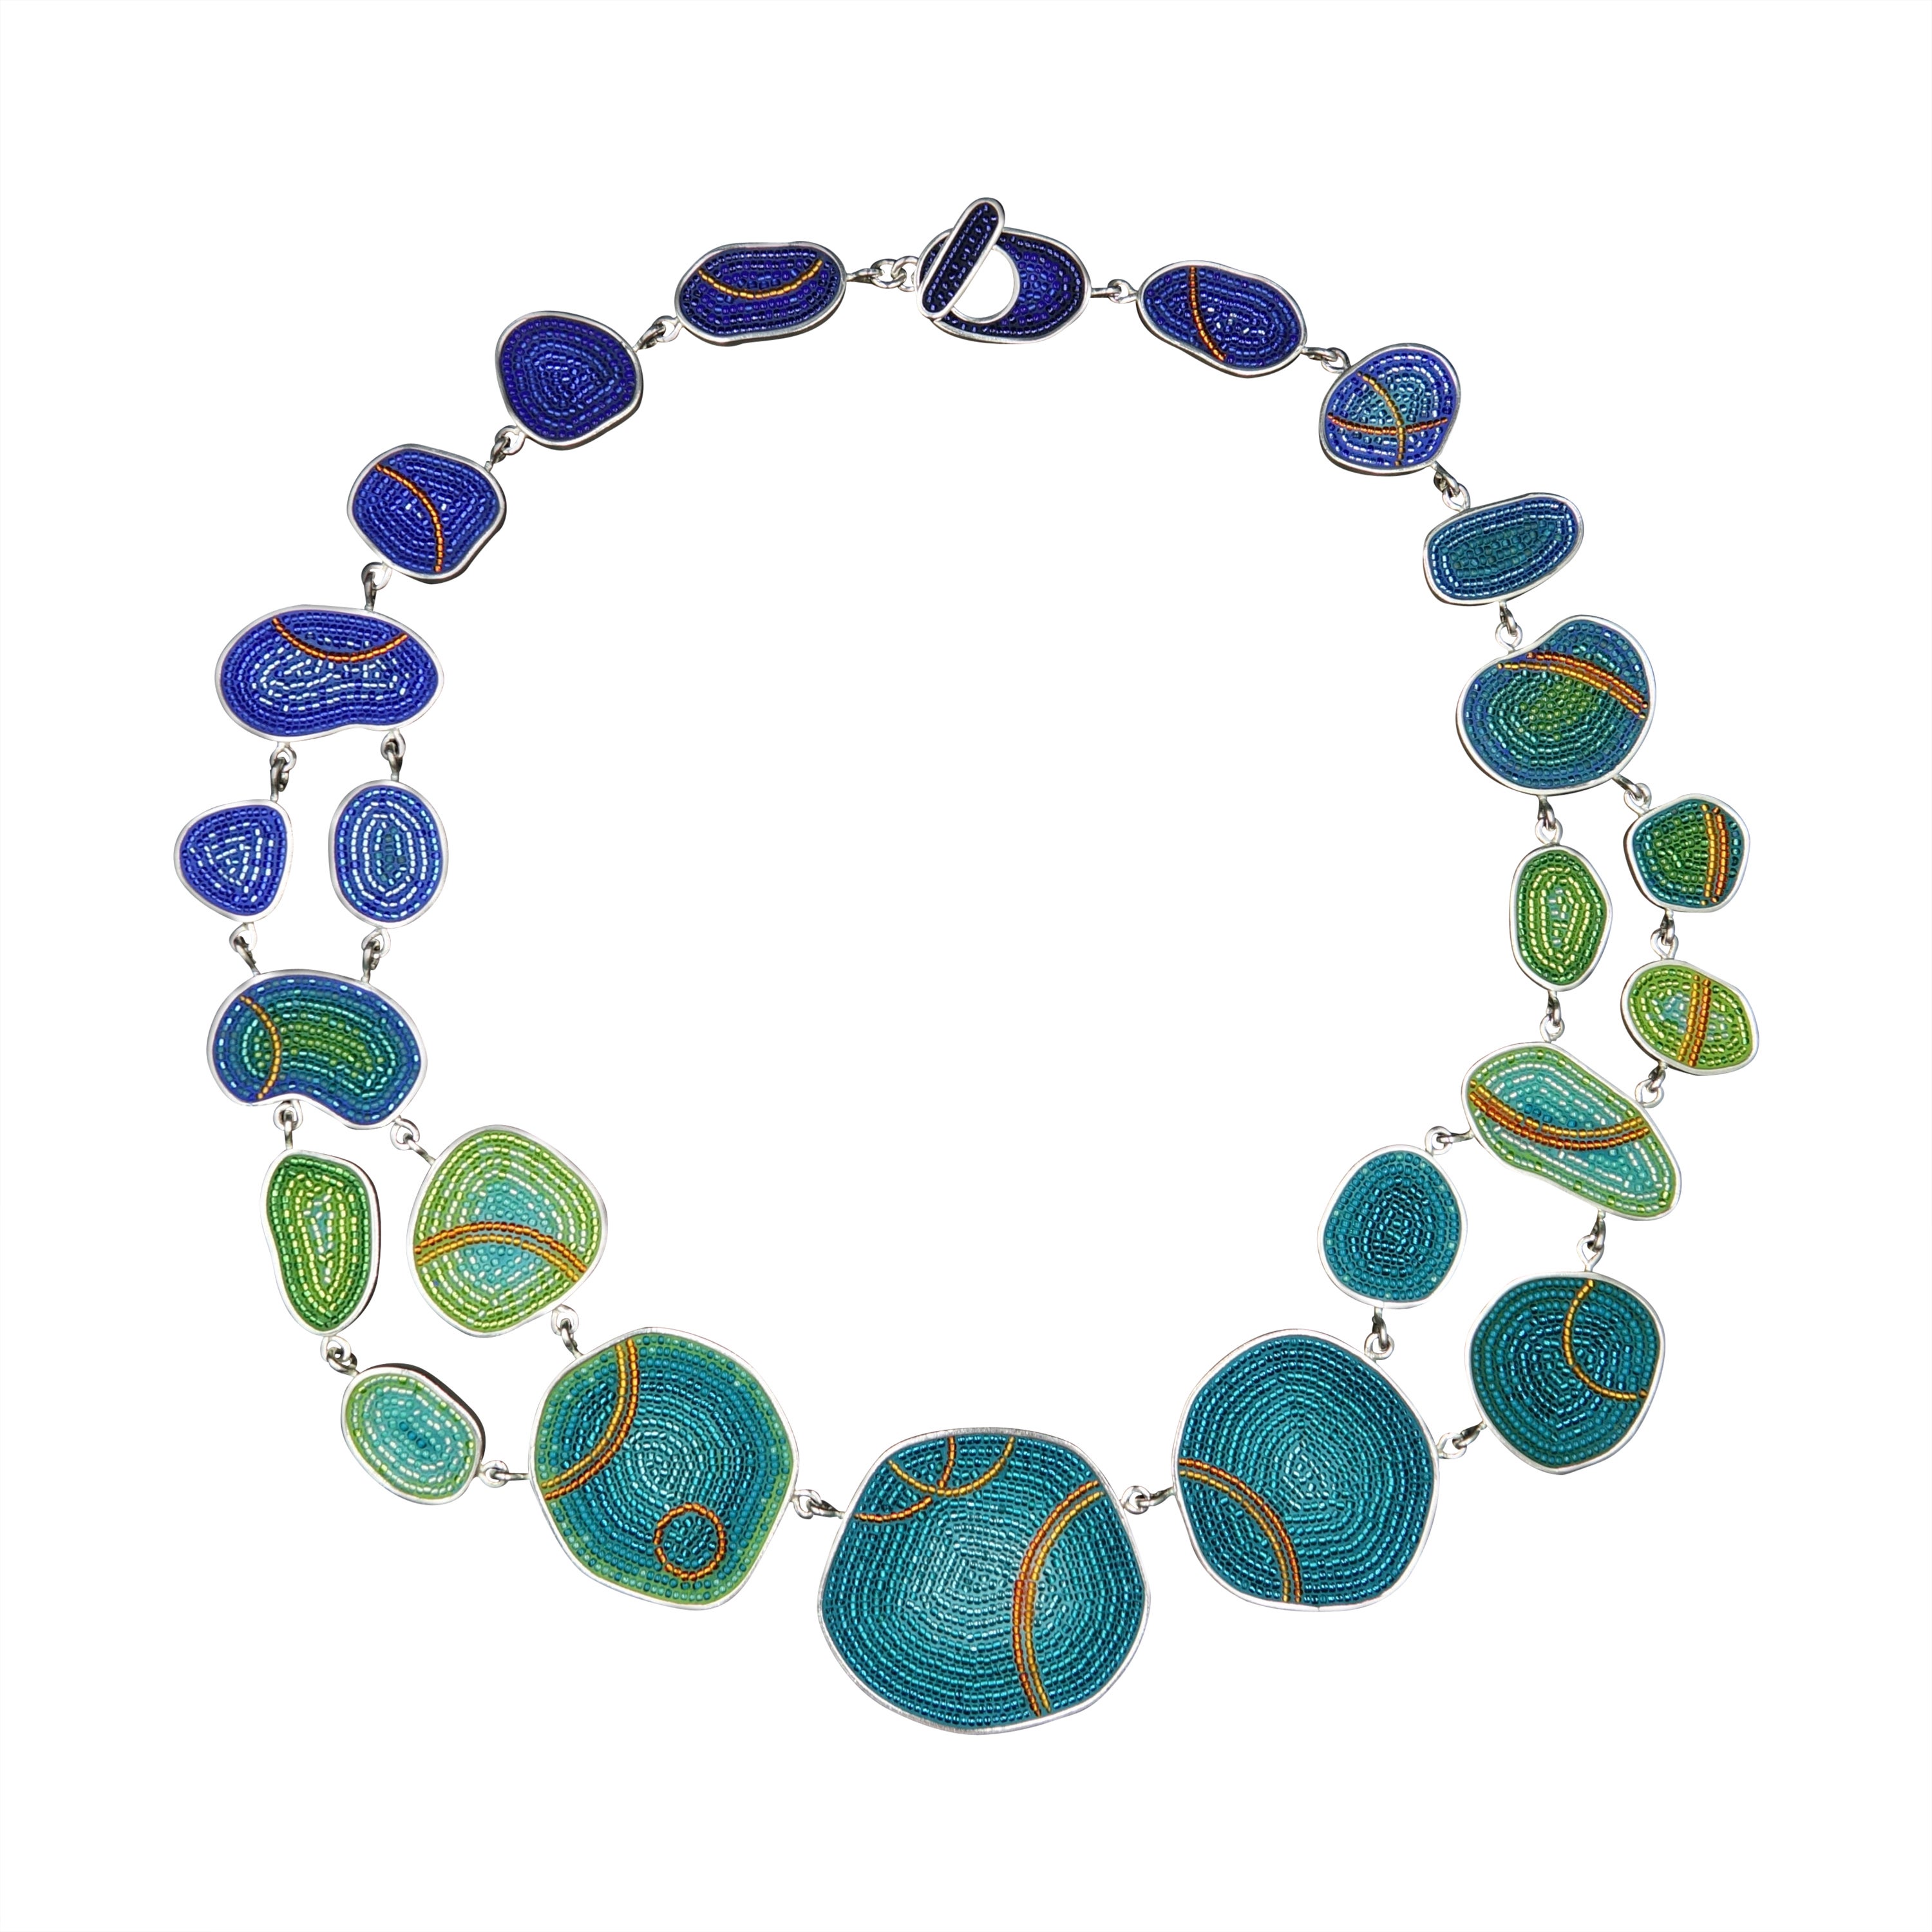 Micro-Mosaic Interconnected Pebbles Necklace by Courtney Denise Lipson For Sale